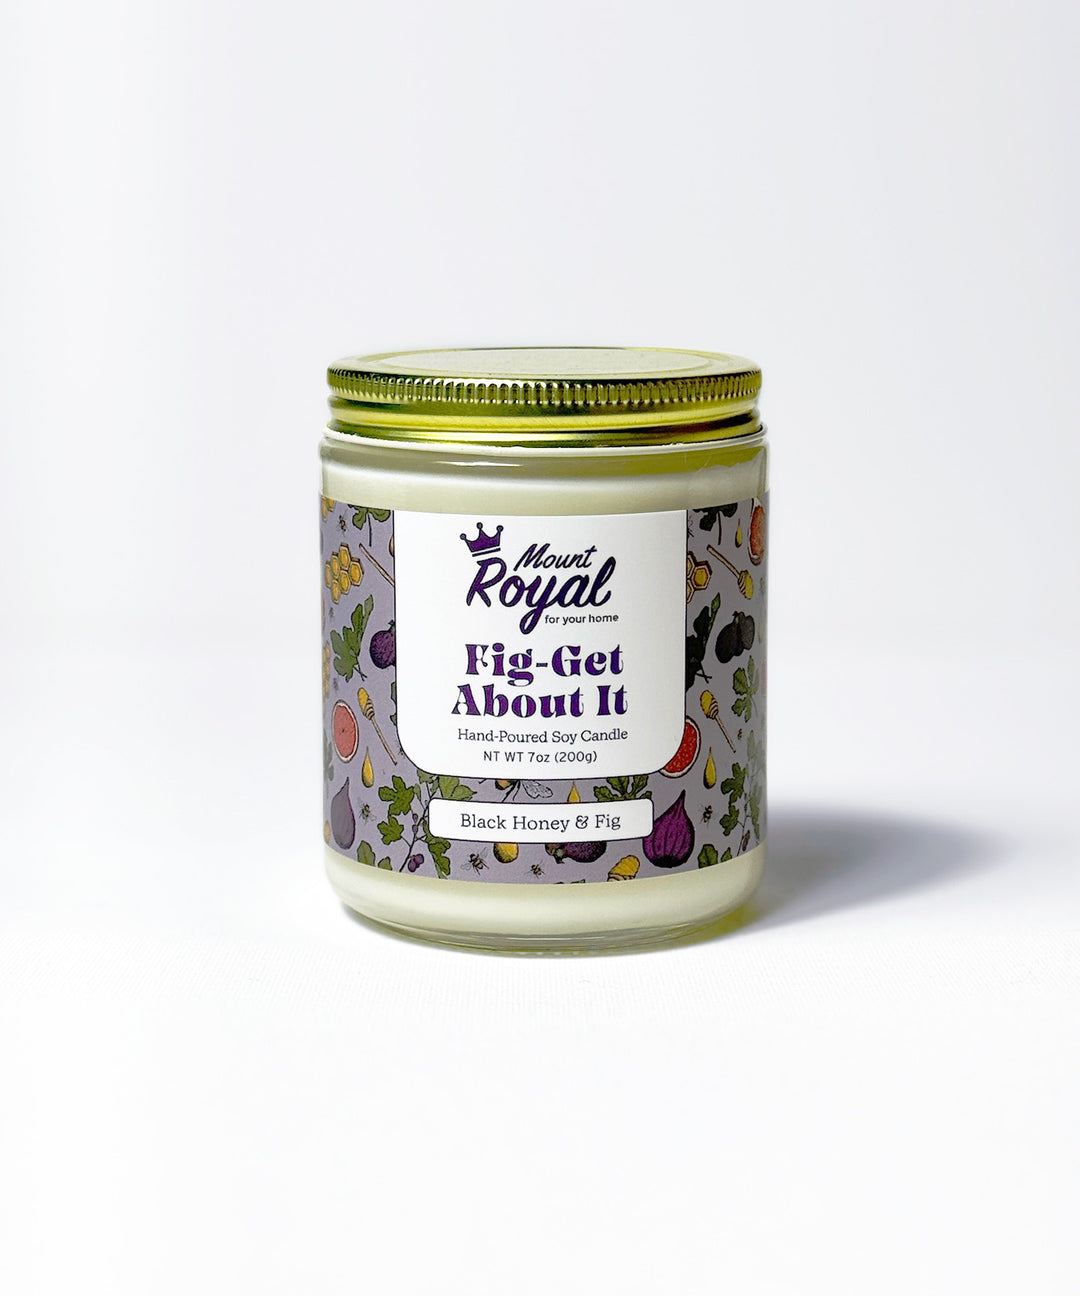 Fig-get About It Candle